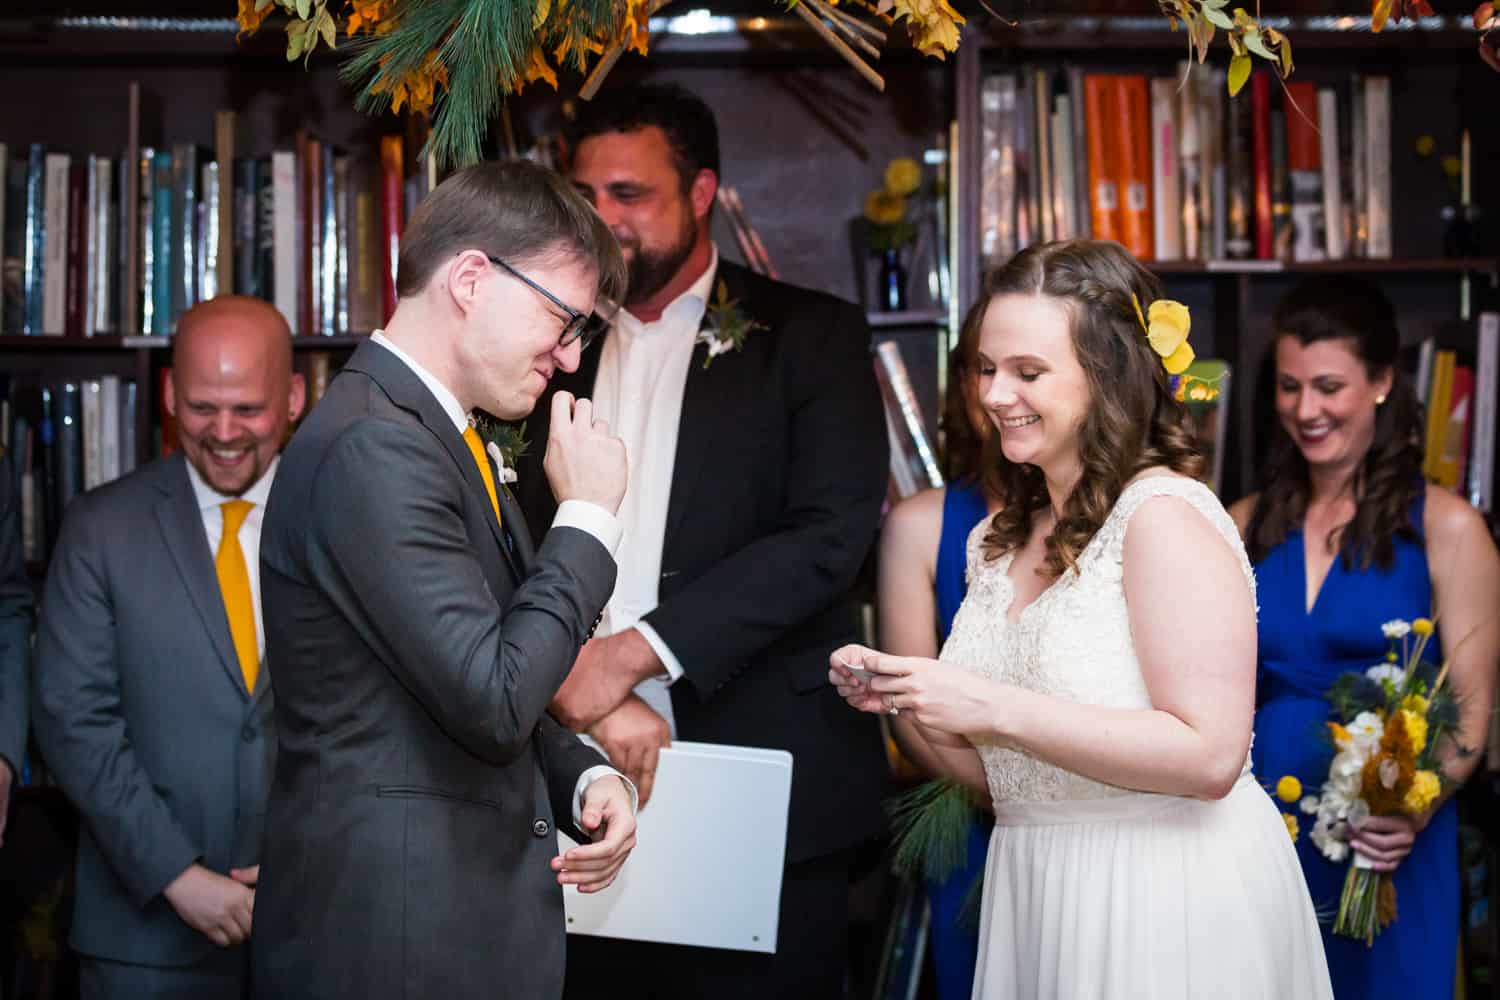 Bride and groom laughing during ceremony for an article on Covid-19 wedding planning